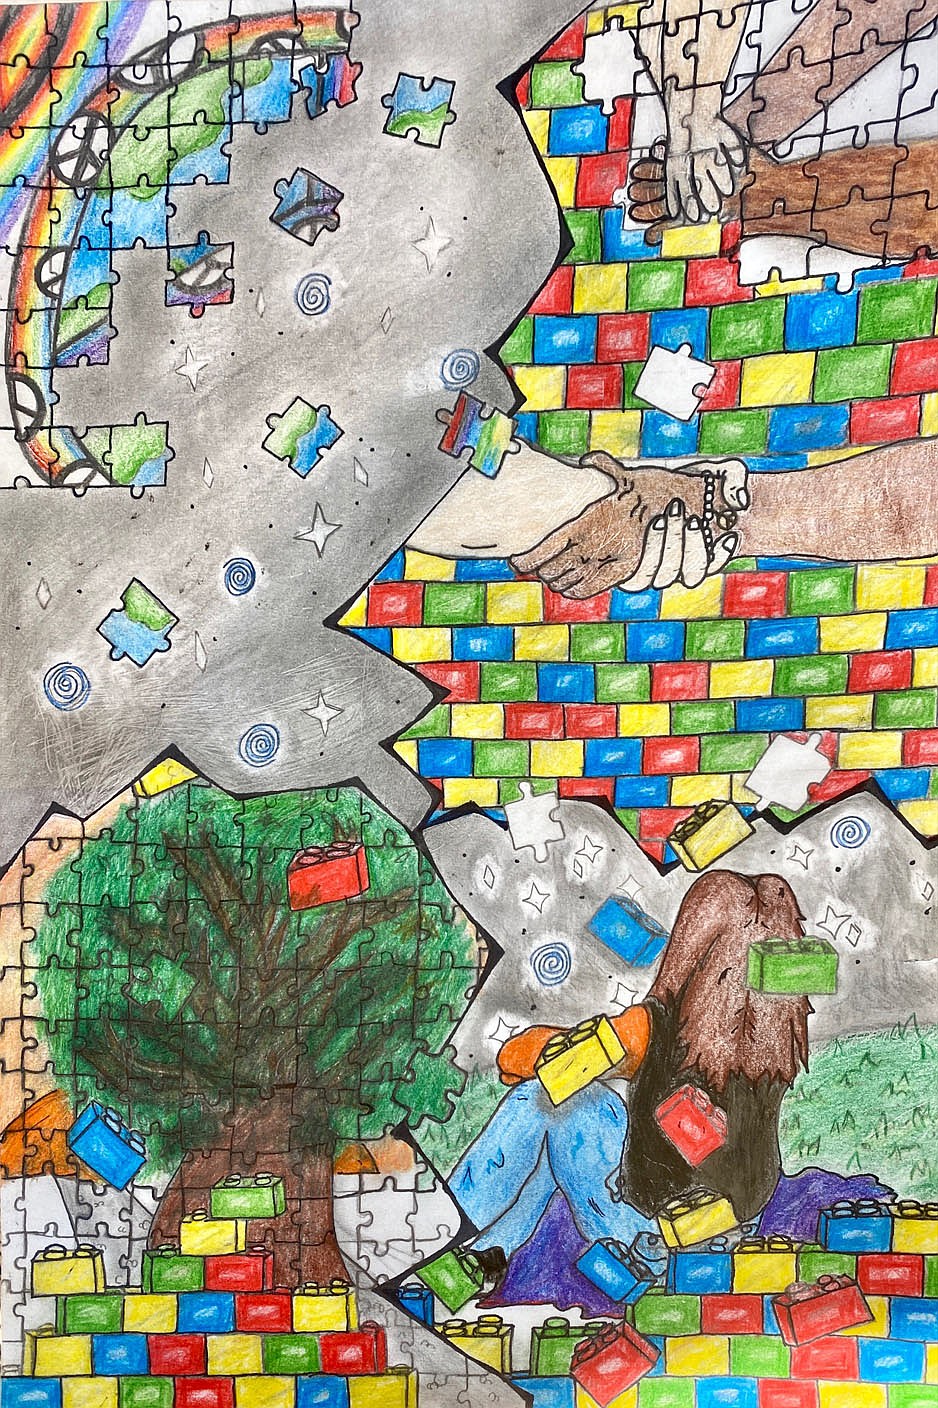 Submitted Photo
The winning poster in the local Lions Club International Peace Poster Contest features a series of scenes connected with interlocking puzzle pieces and Lego blocks. Scenes include clasping hands, a rainbow with peace signs and a young girl sitting beneath a tree and gazing up at the stars. The first place poster, created by Reese Long, has been sent on to district competition.